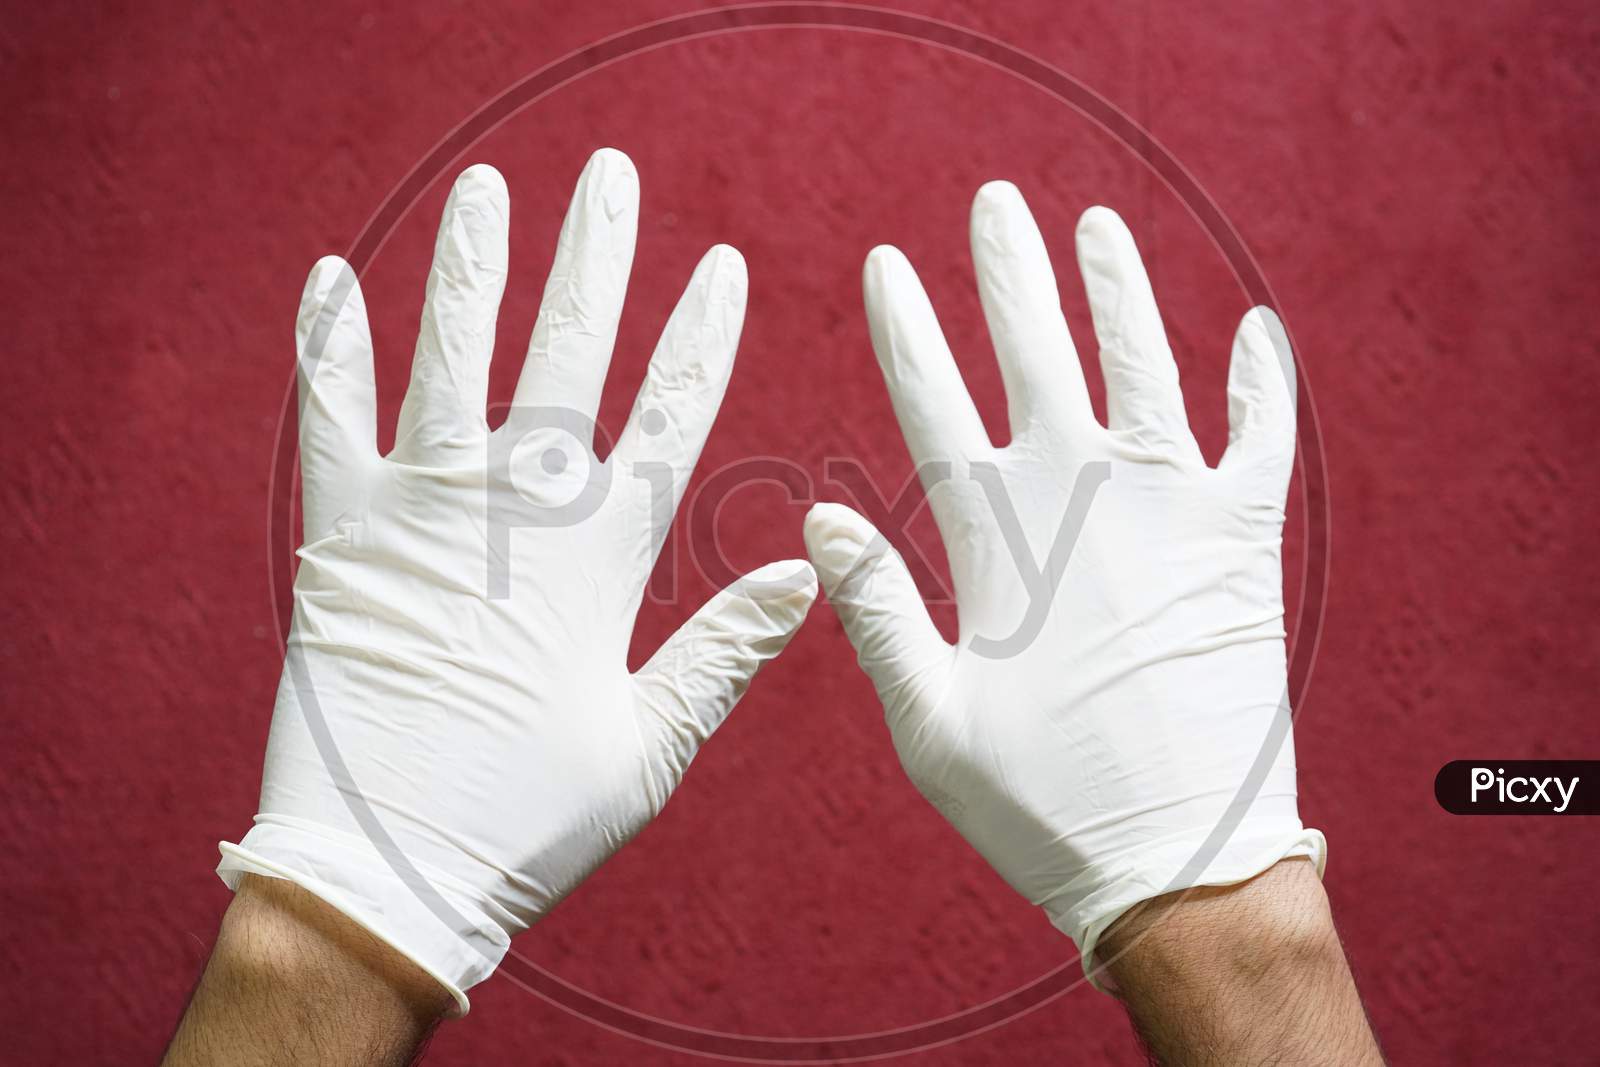 White medical gloves worn by a man.